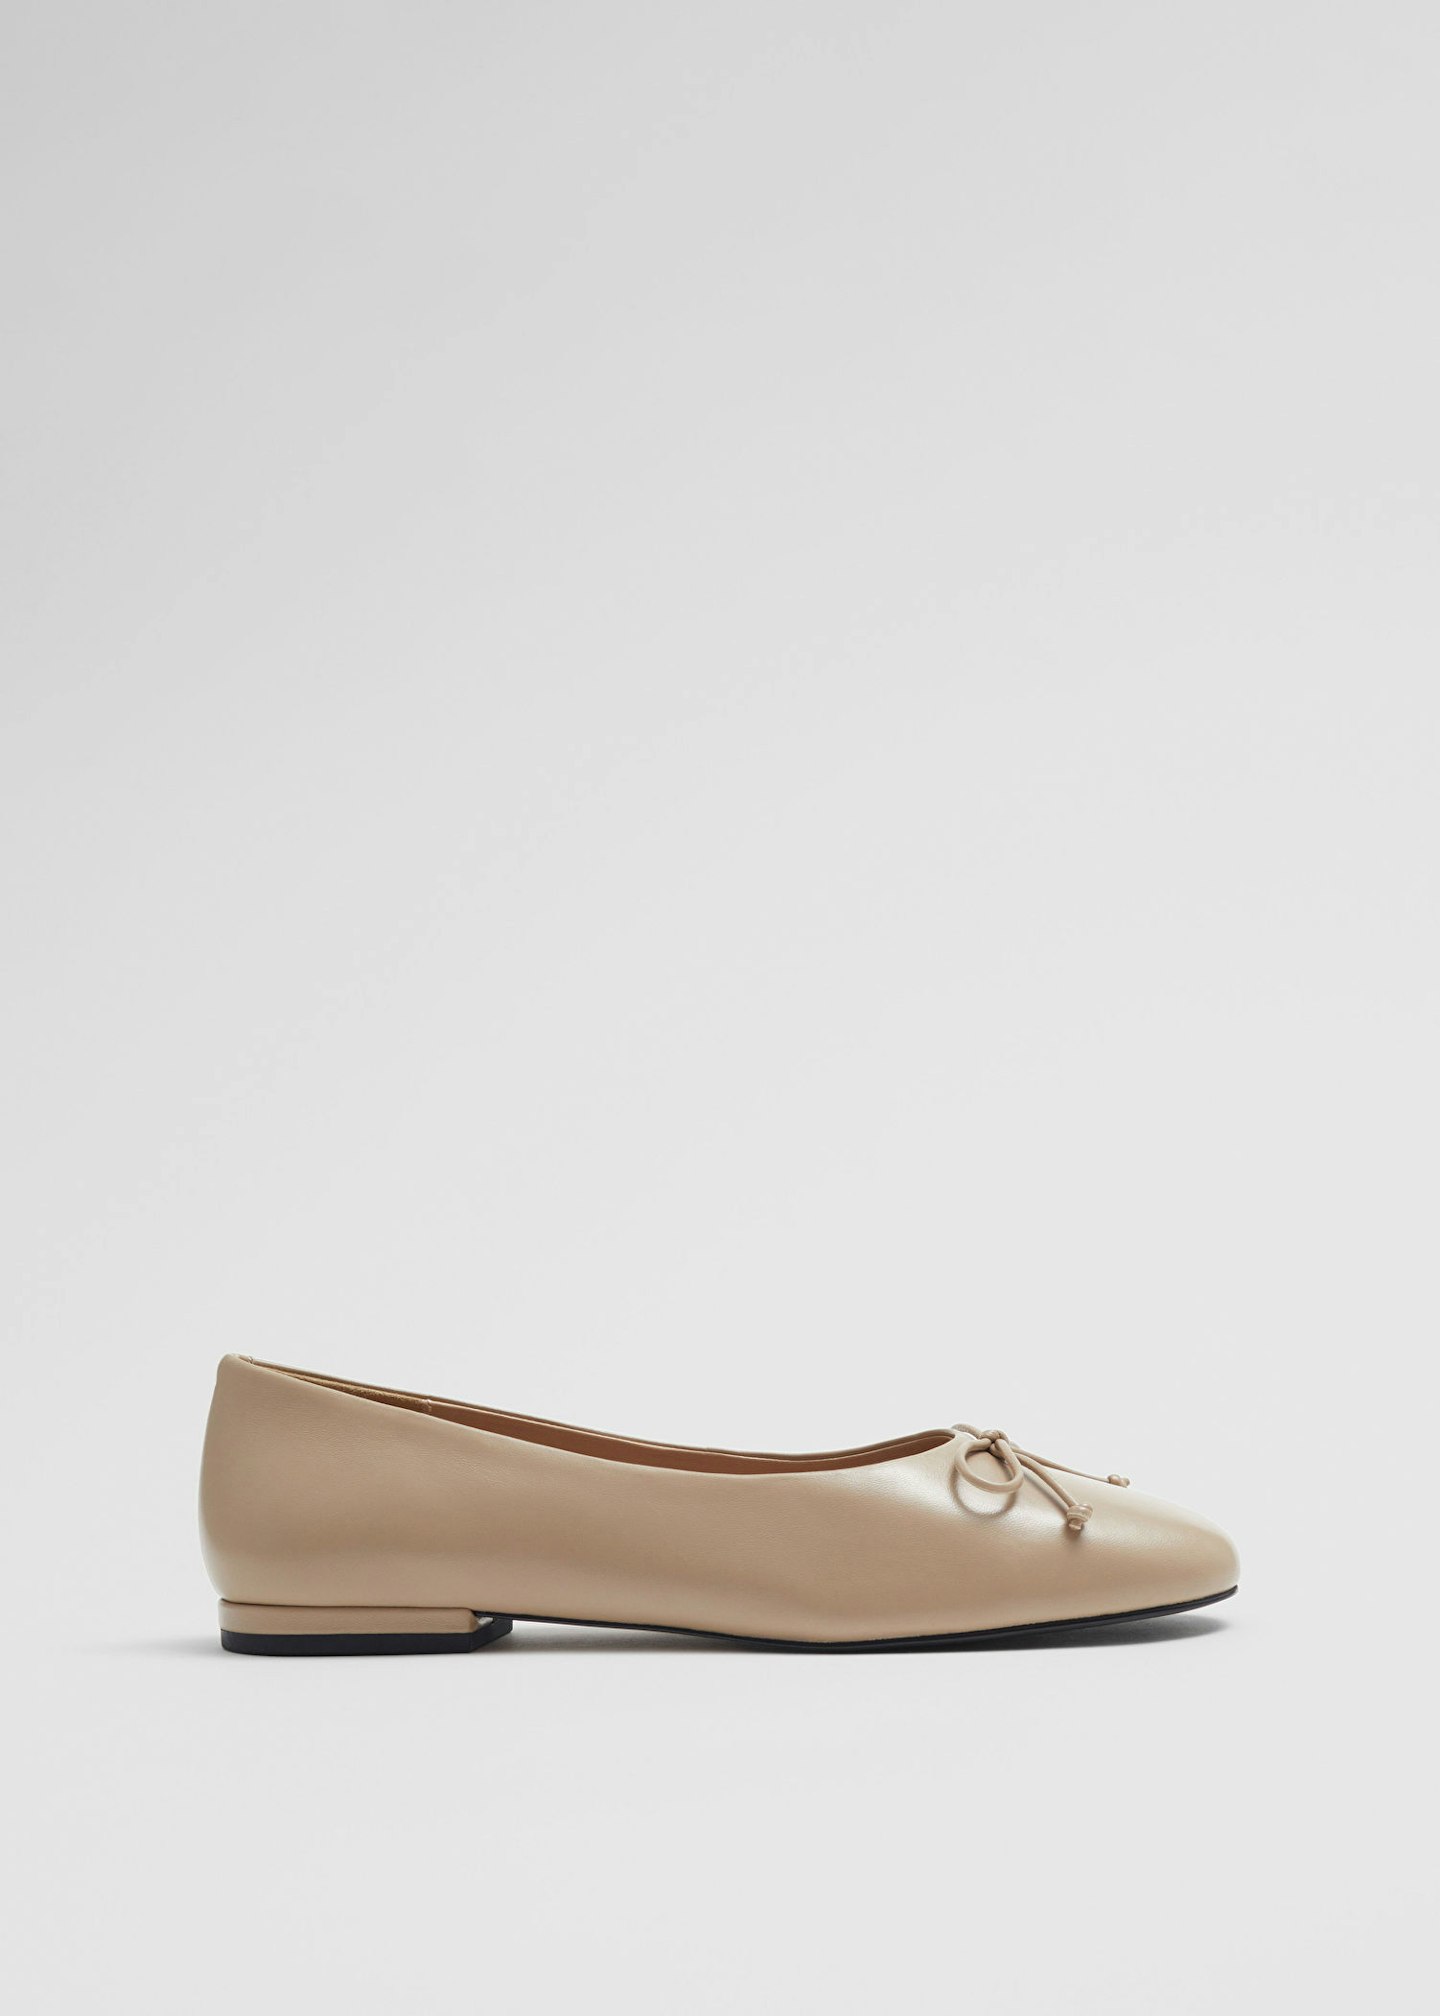 & Other Stories, Leather Ballet Flats